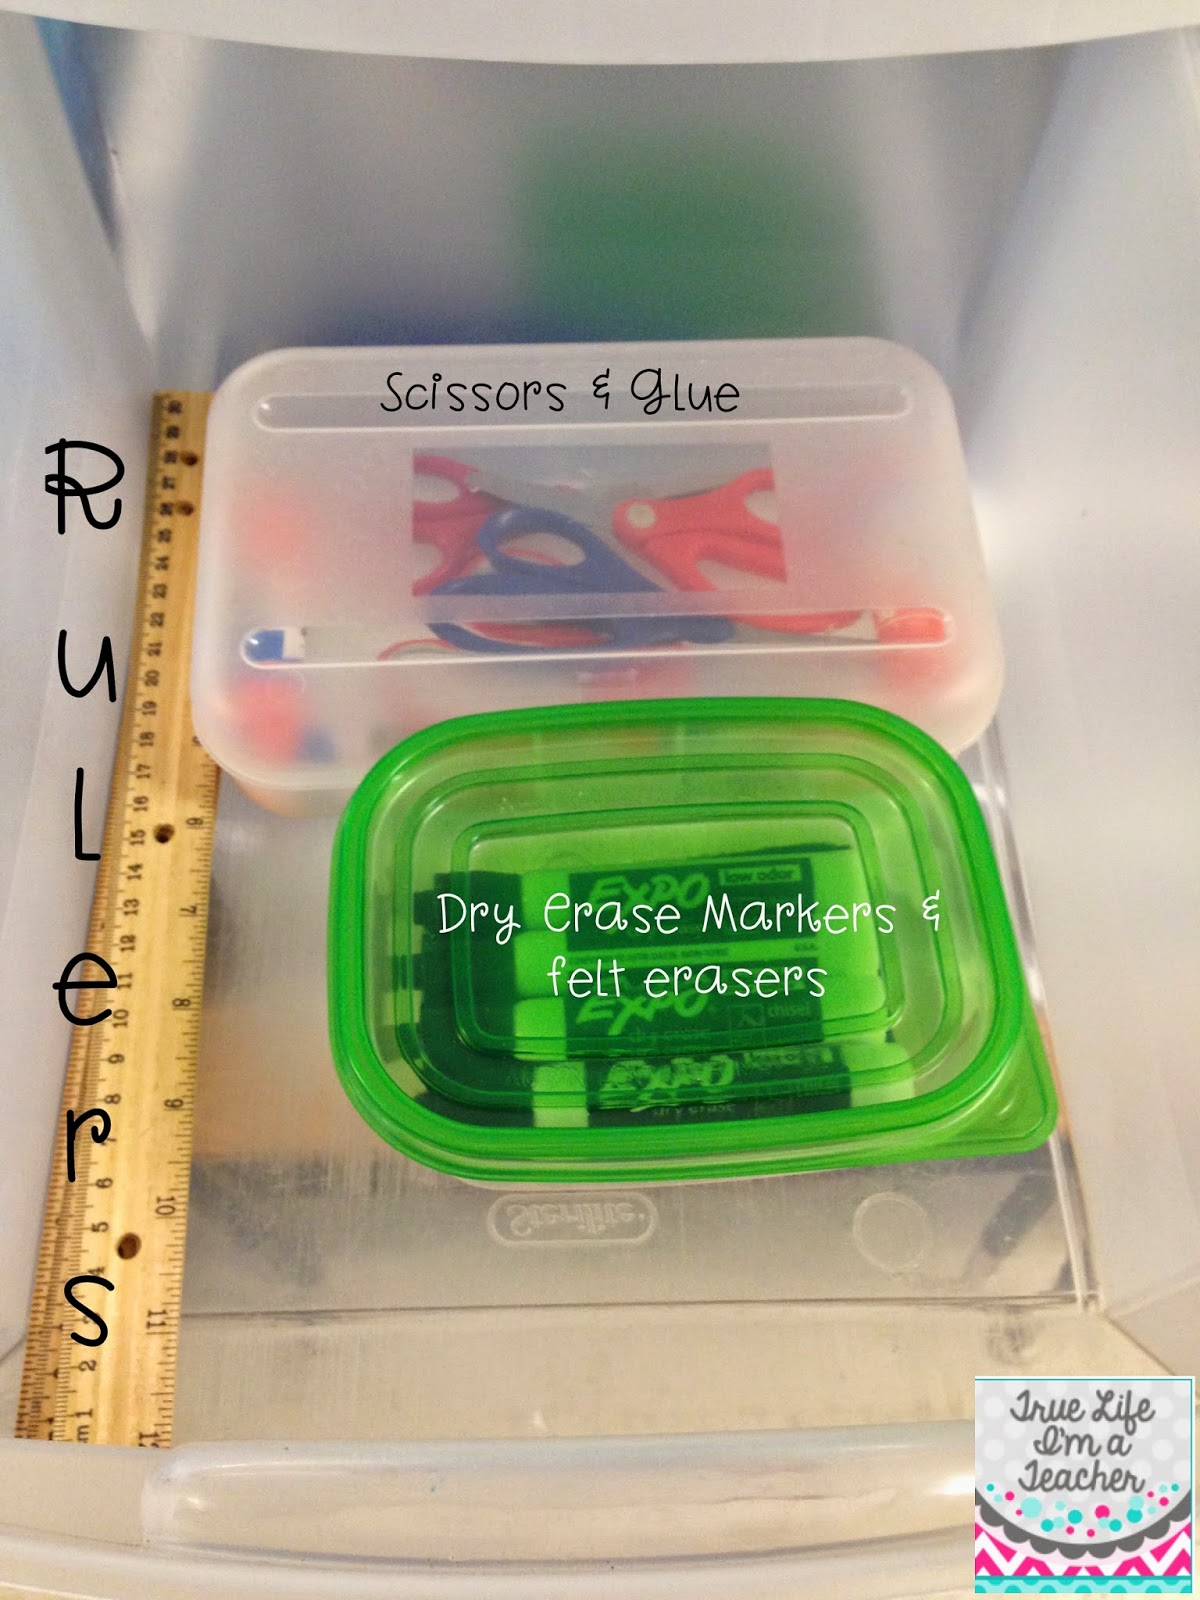 My Sister Is a Second-Grade Teacher, and These are Her Classroom  Organization Must-Haves